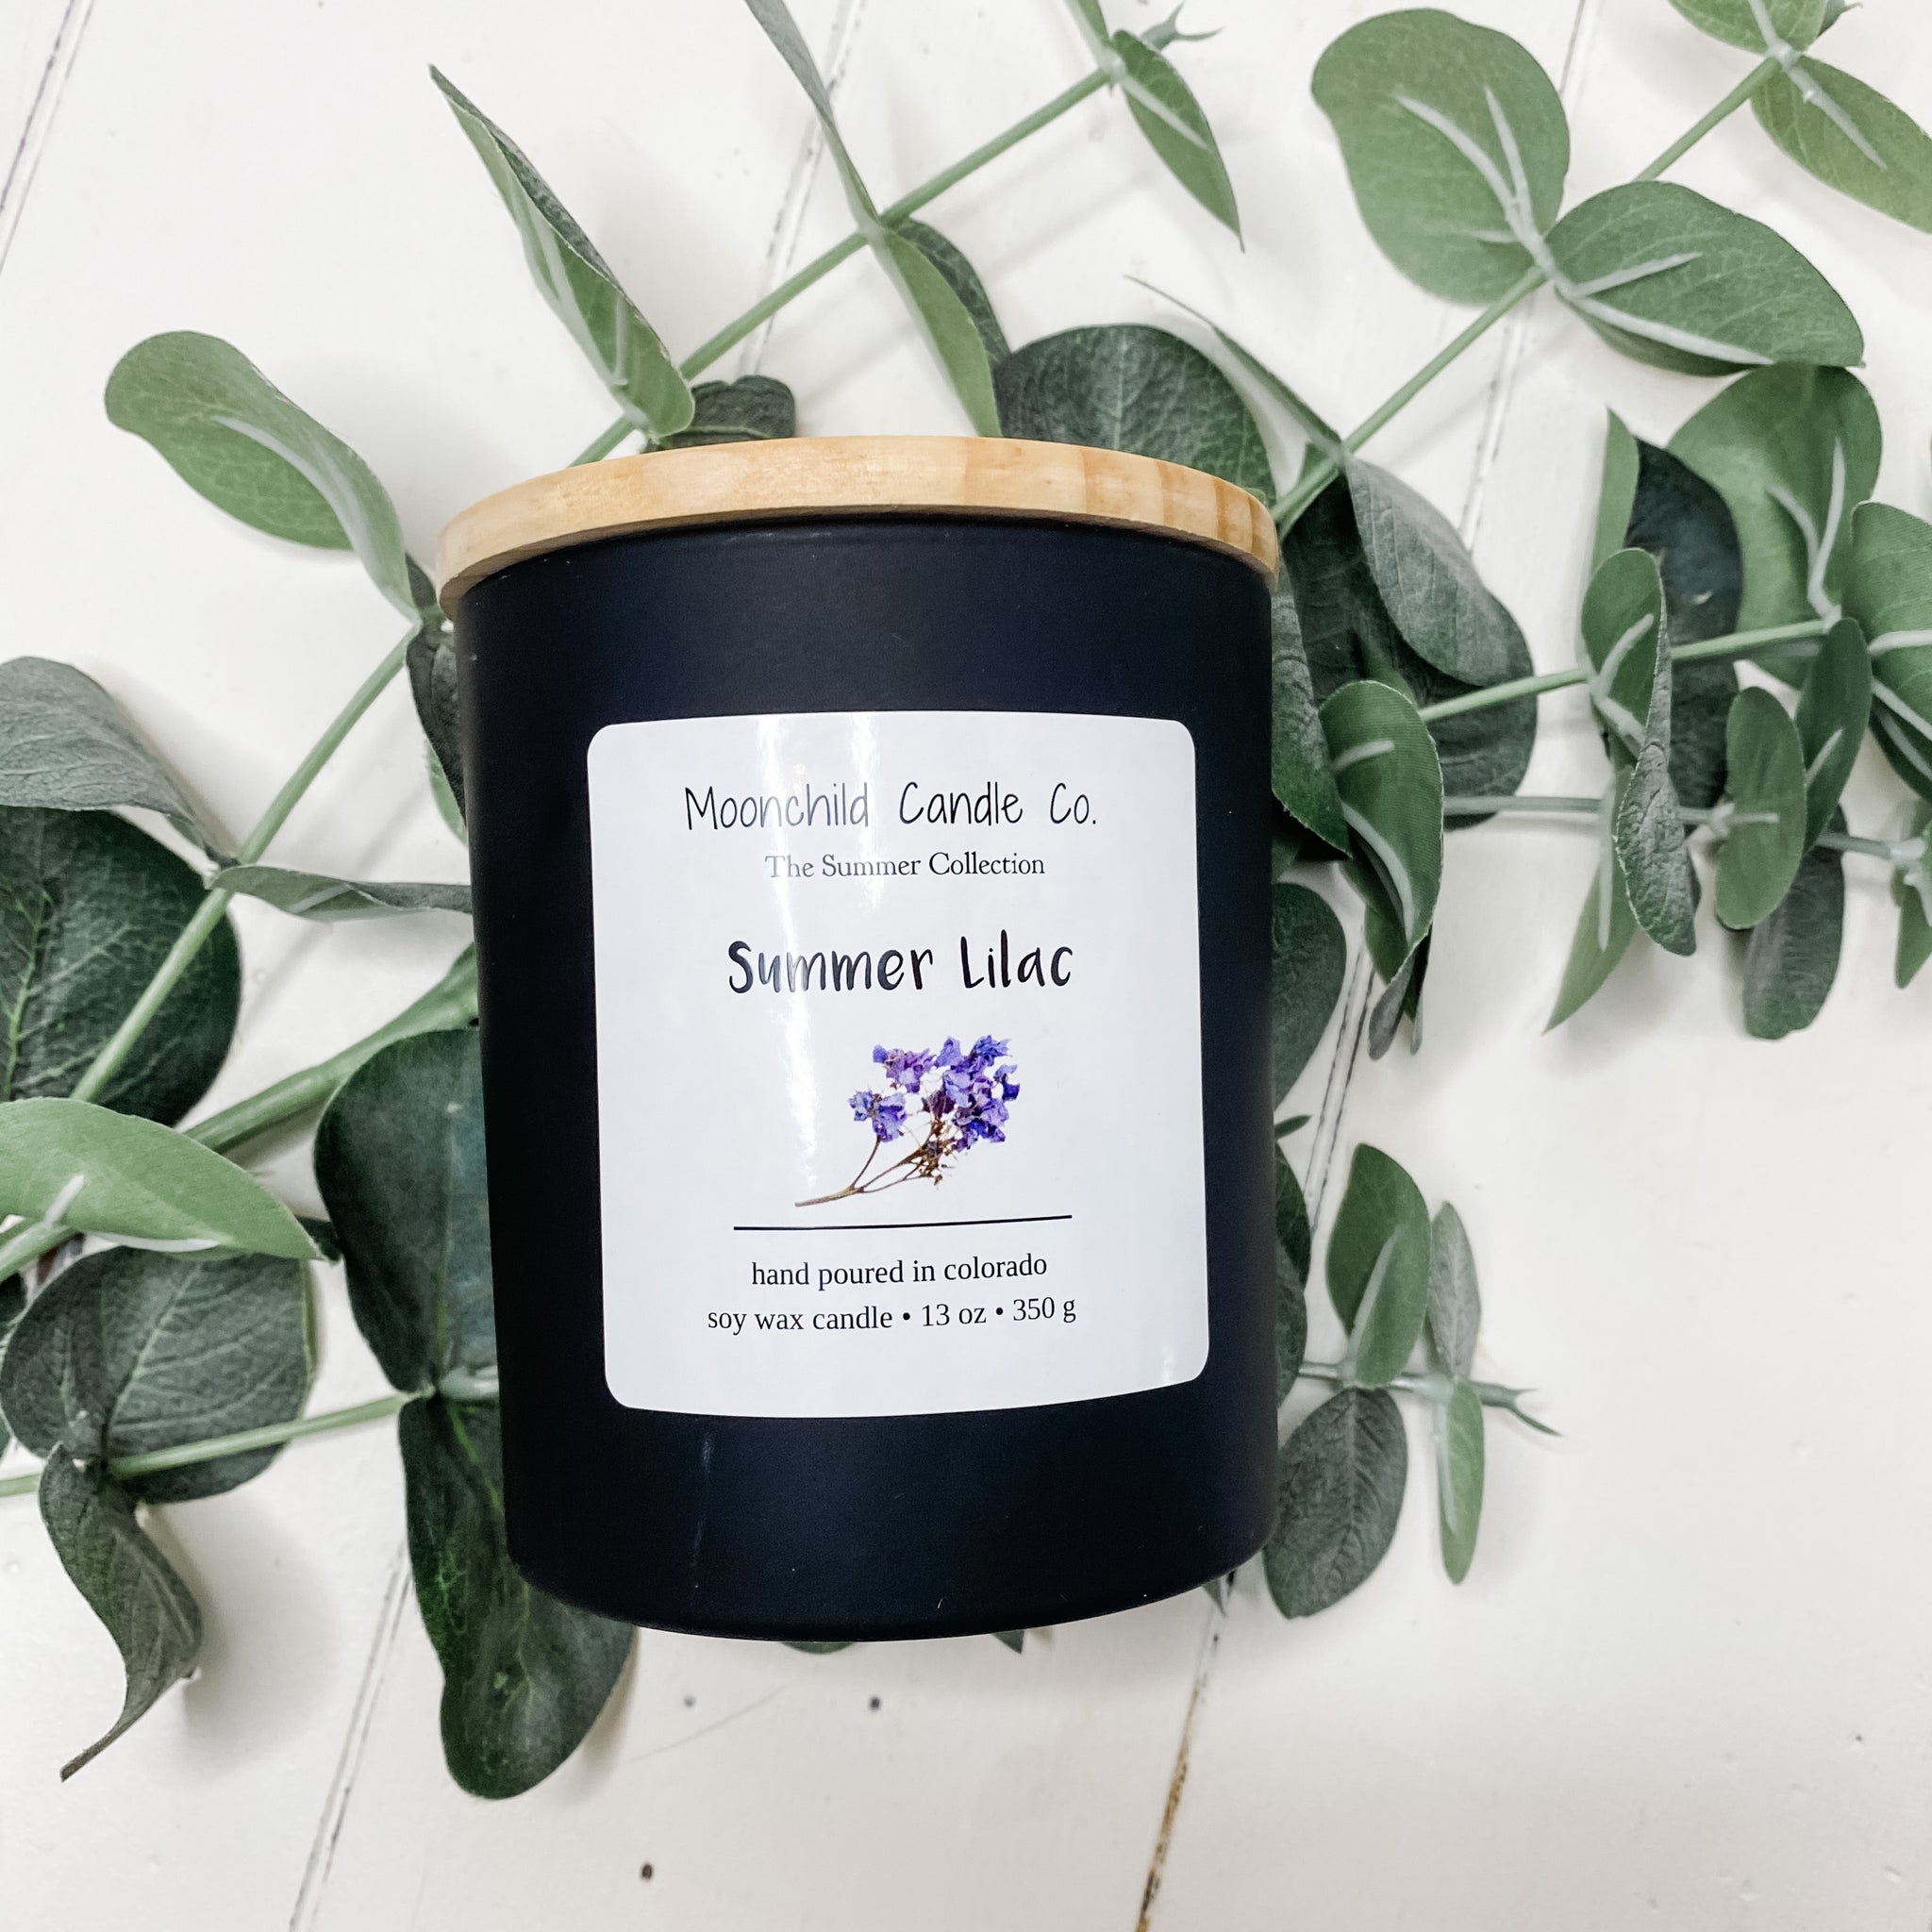 Summer Lilac - Moonchild Candle Co.